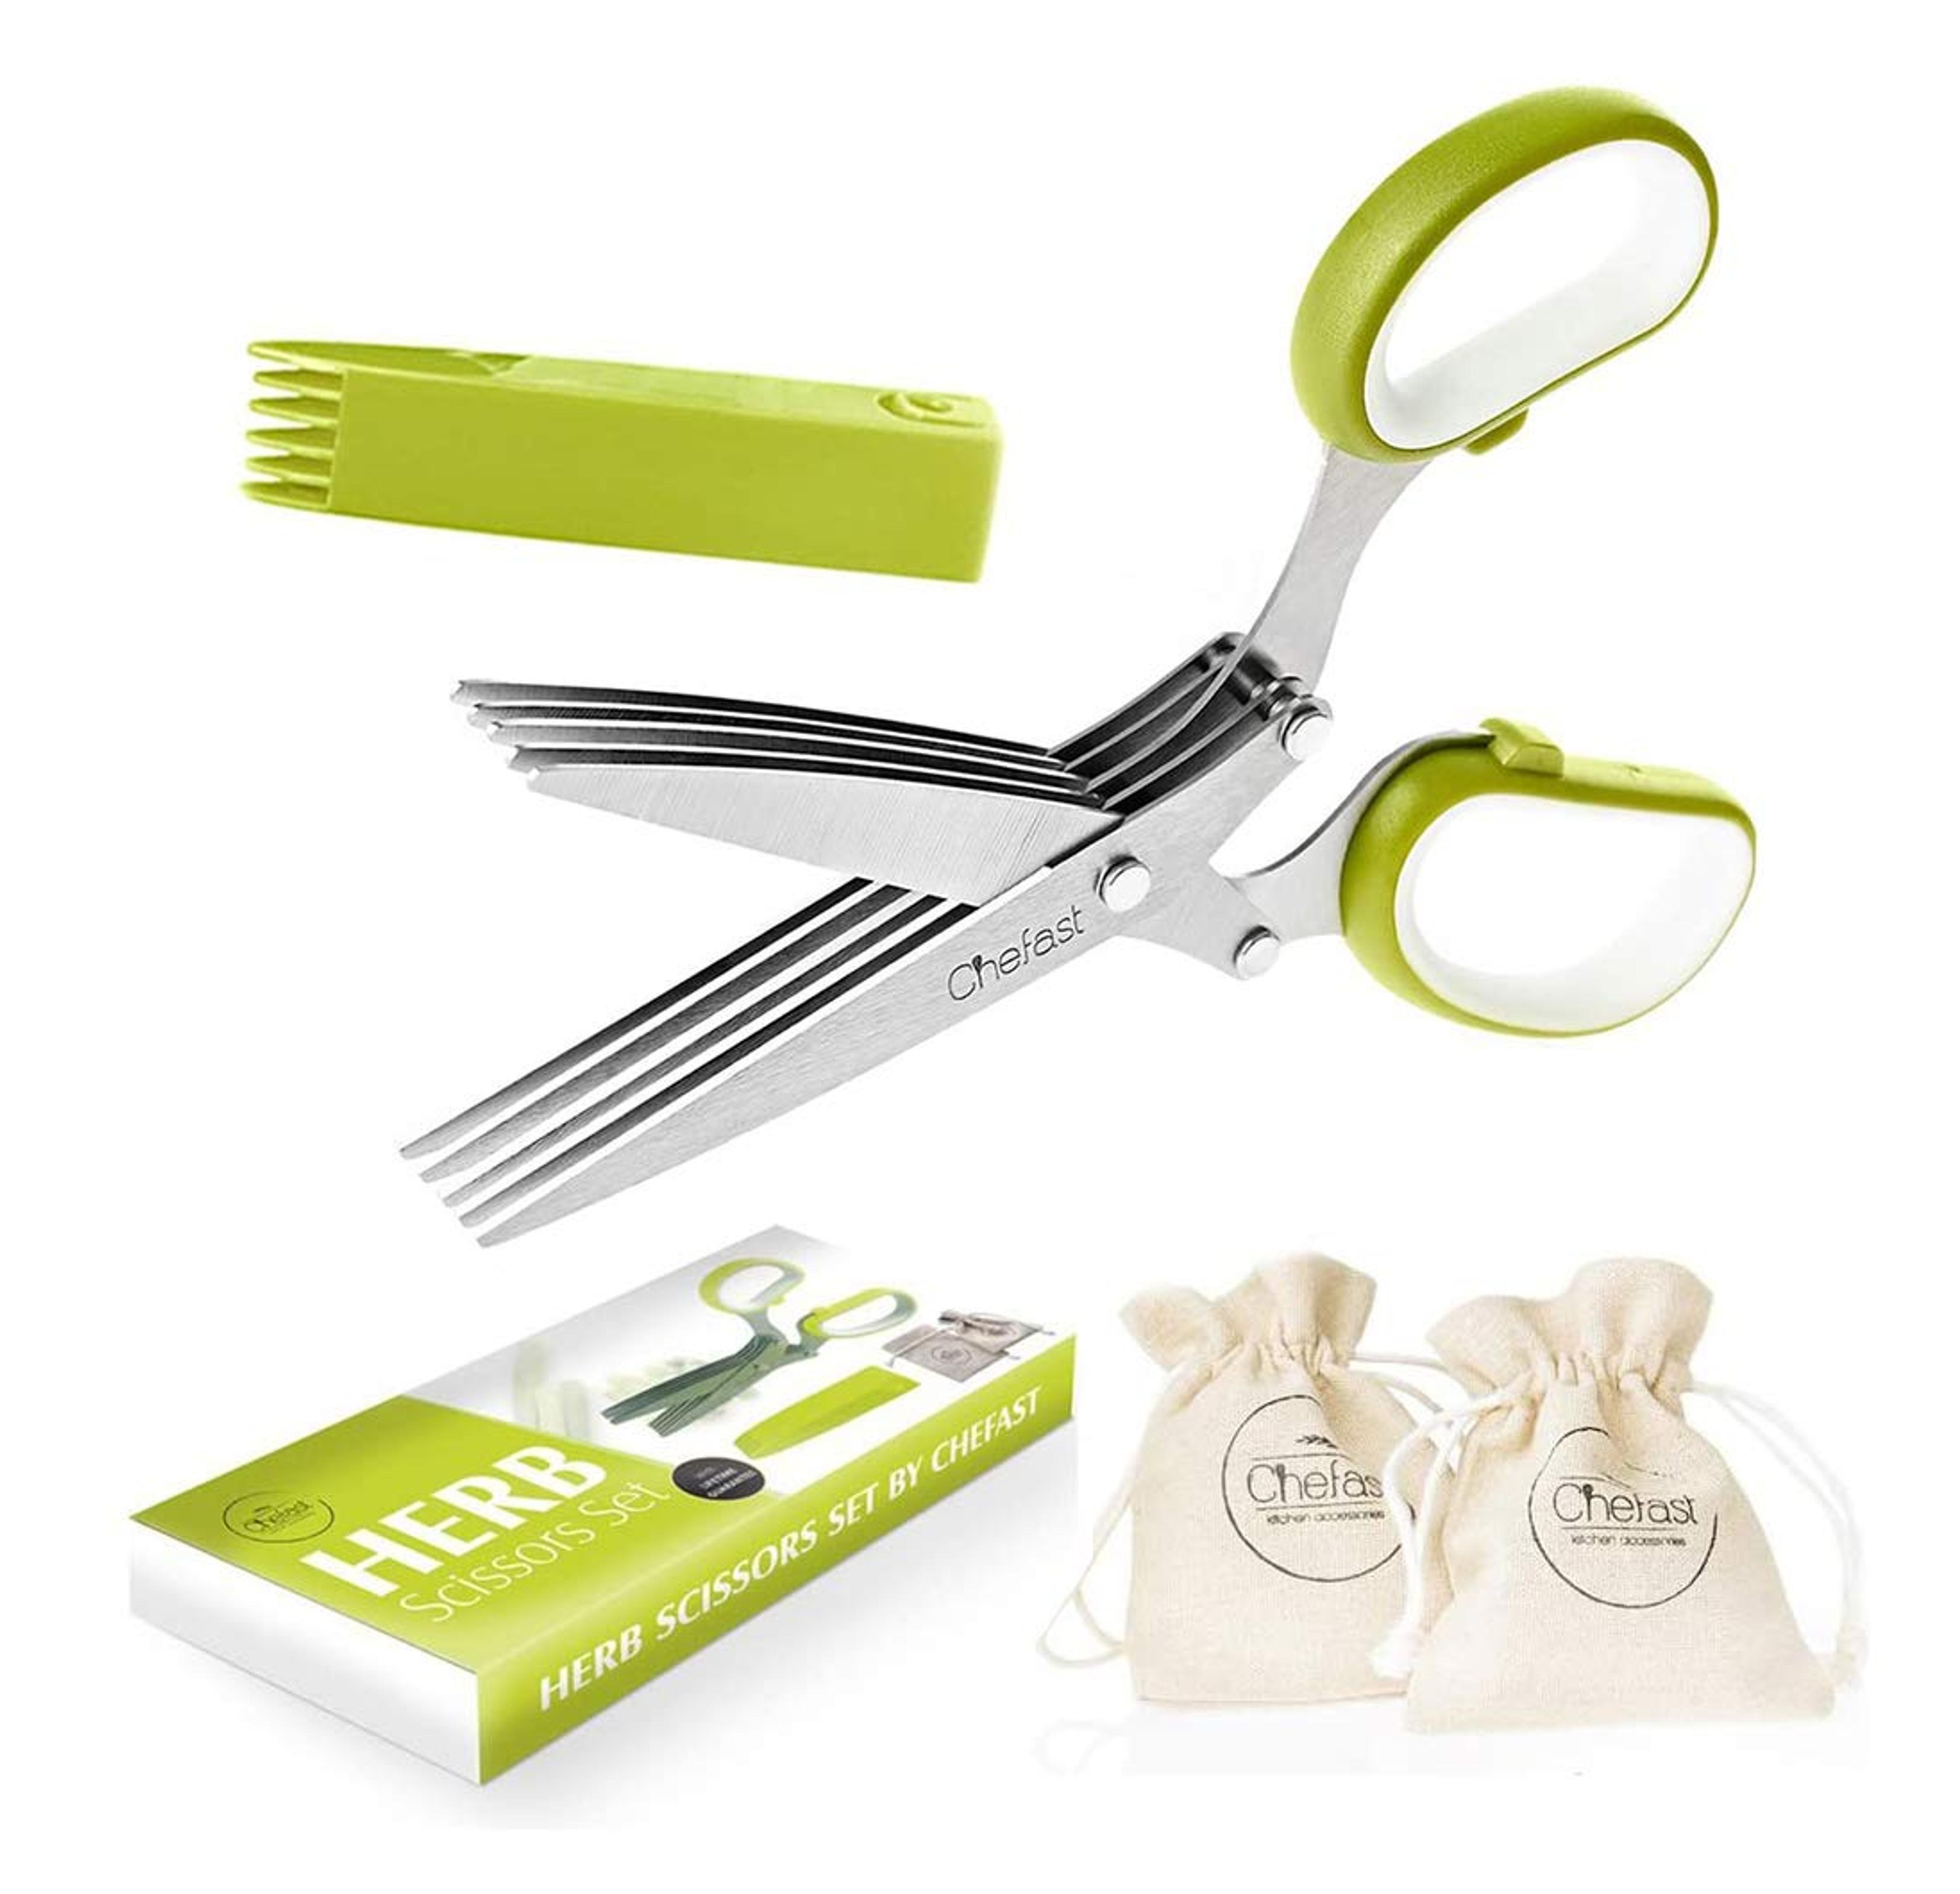 Amazon.com: Chefast Herb Scissors Set - Multipurpose Cutting Shears with 5 Stainless Steel Blades, Jute Pouches, and Safety Cover with Cleaning Comb - Cutter / Chopper / Mincer for Herbs - Kitchen Gadget : Home & Kitchen